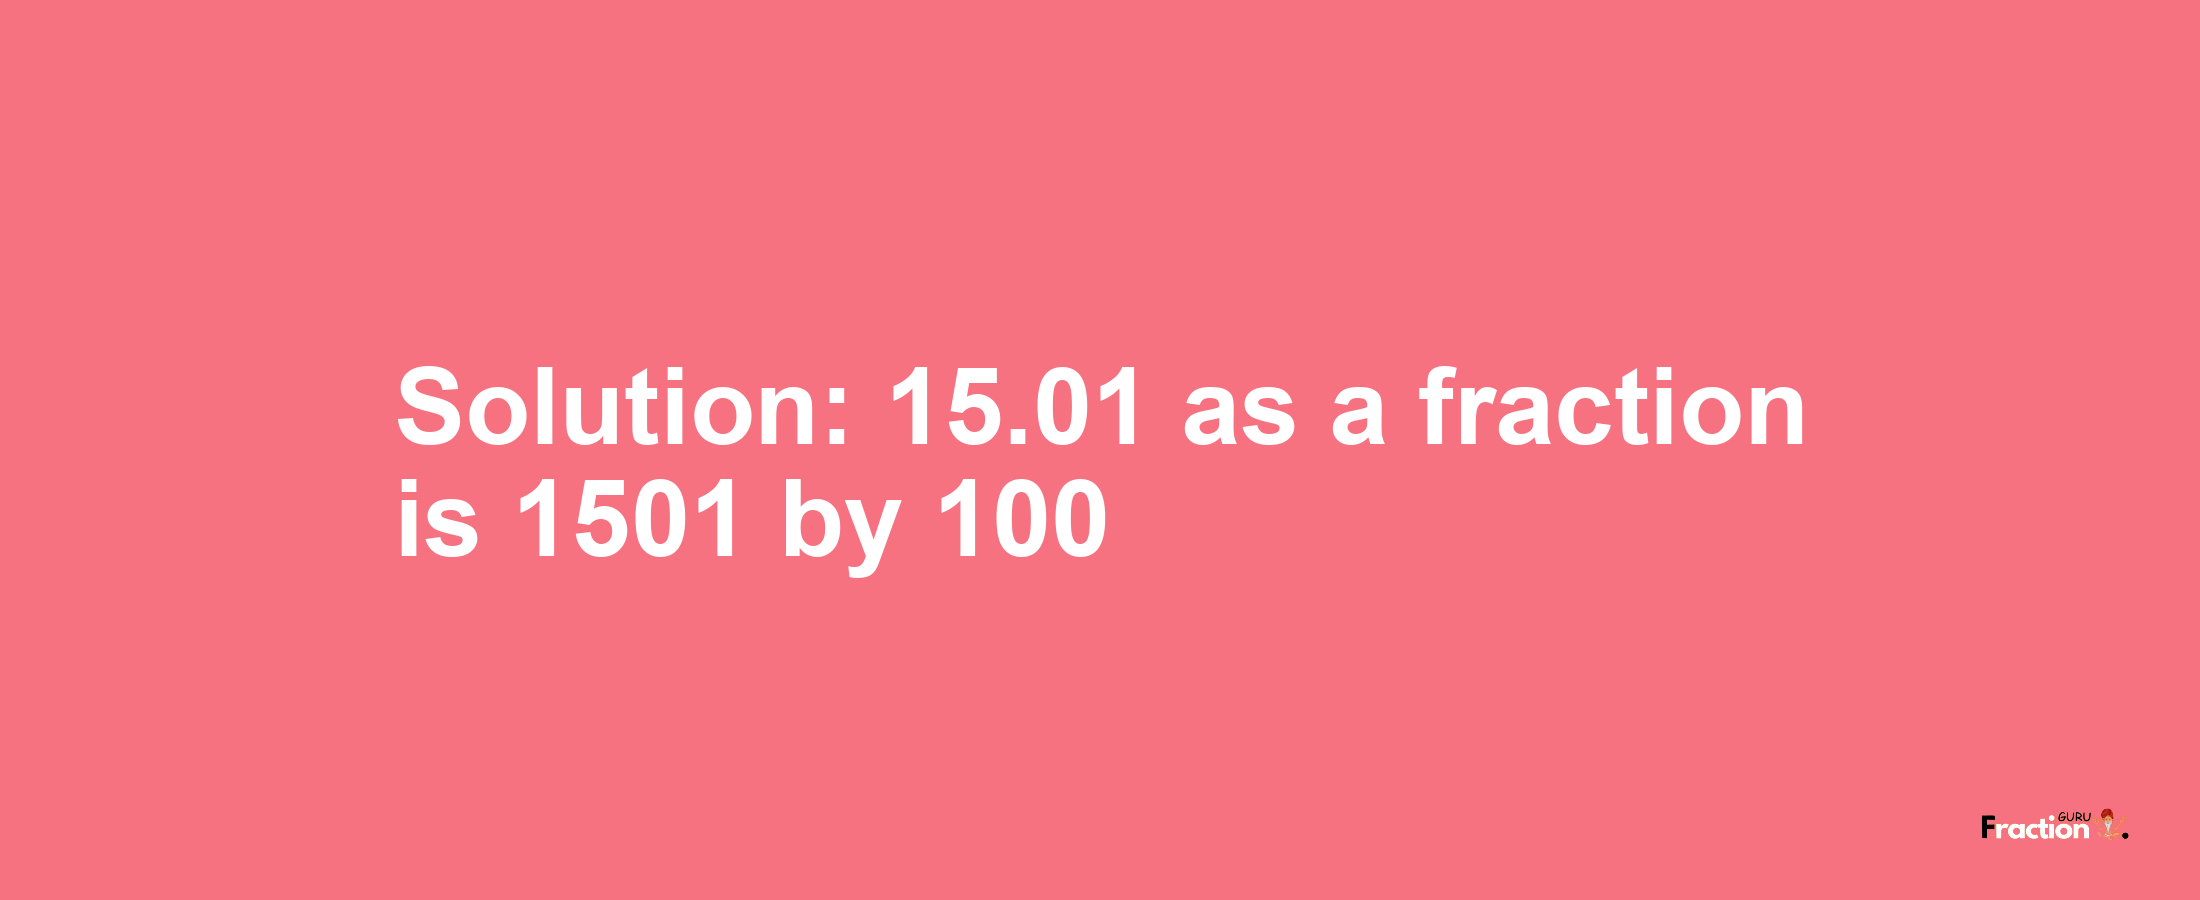 Solution:15.01 as a fraction is 1501/100